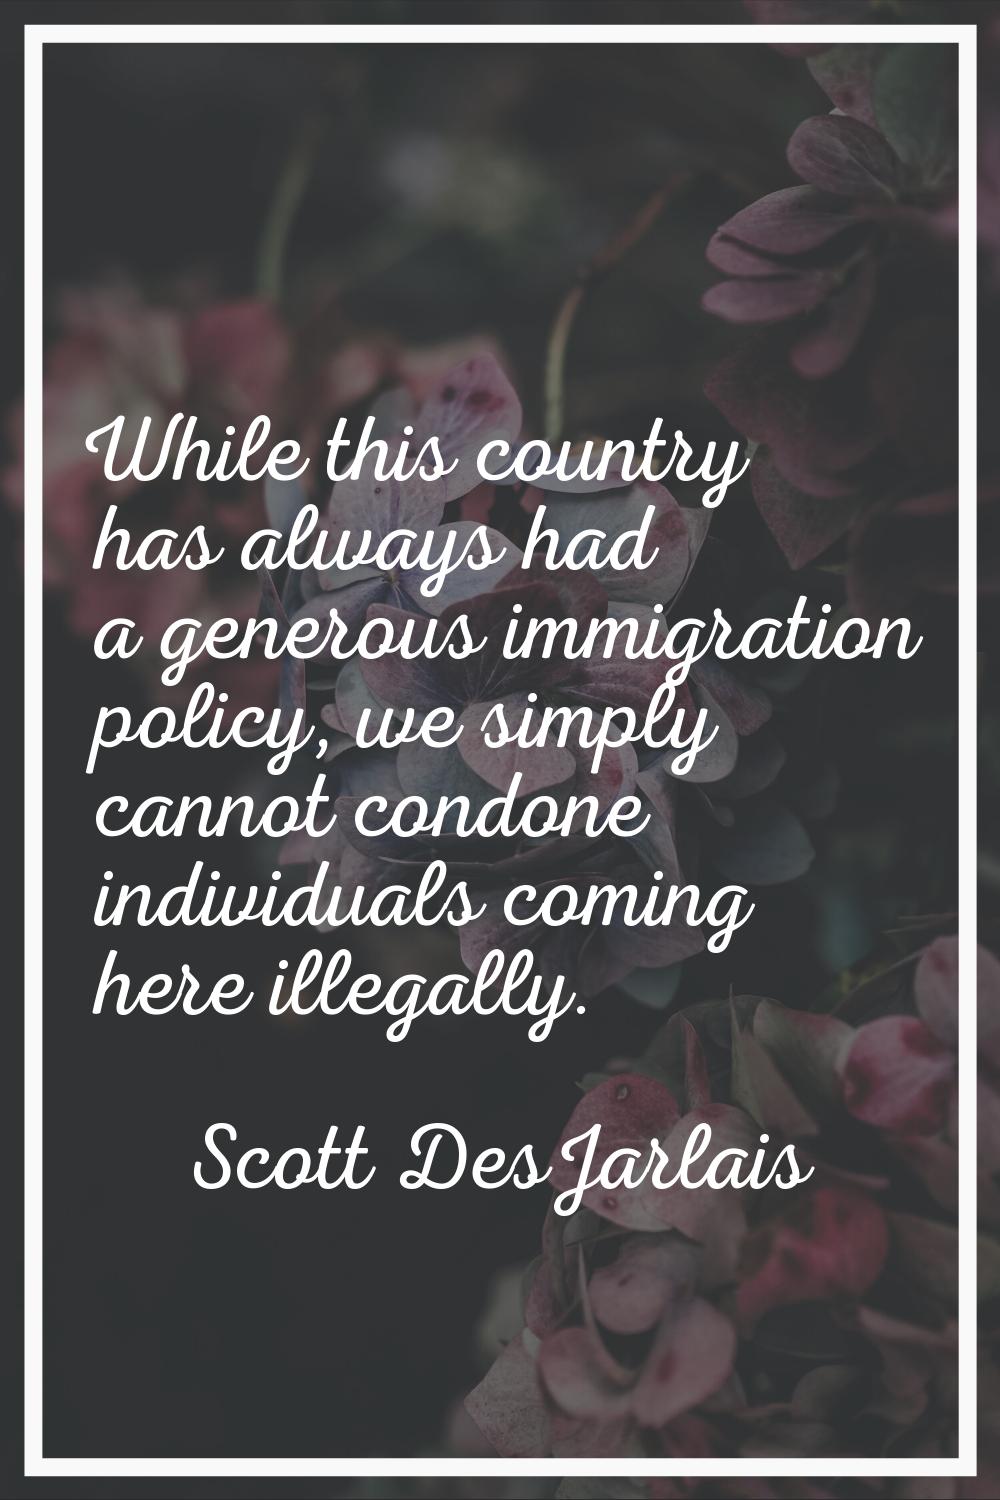 While this country has always had a generous immigration policy, we simply cannot condone individua